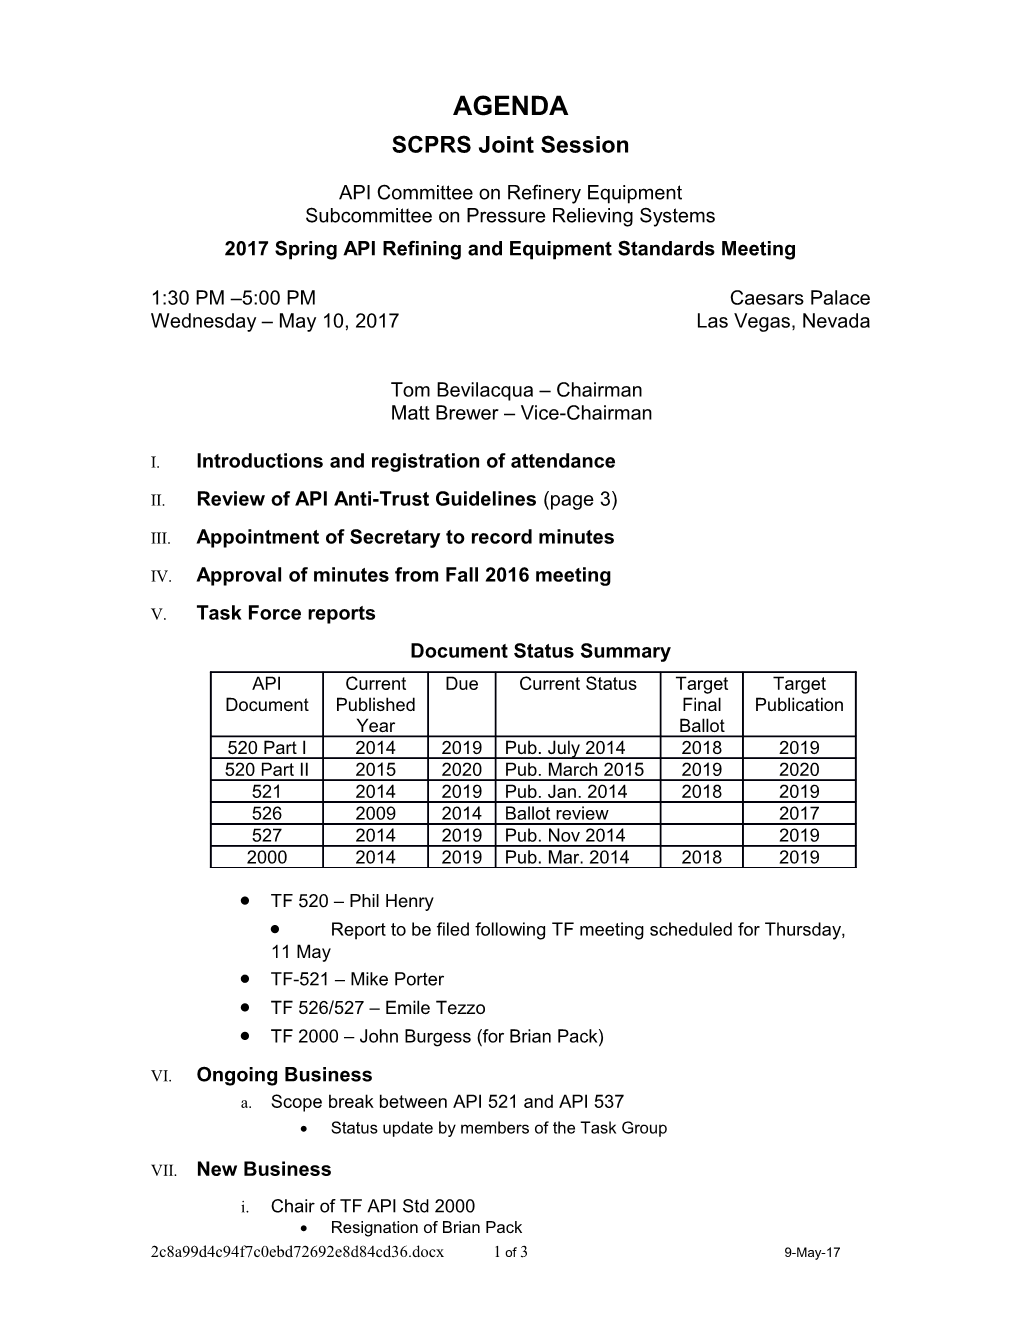 2017 Spring API Refining and Equipment Standards Meeting